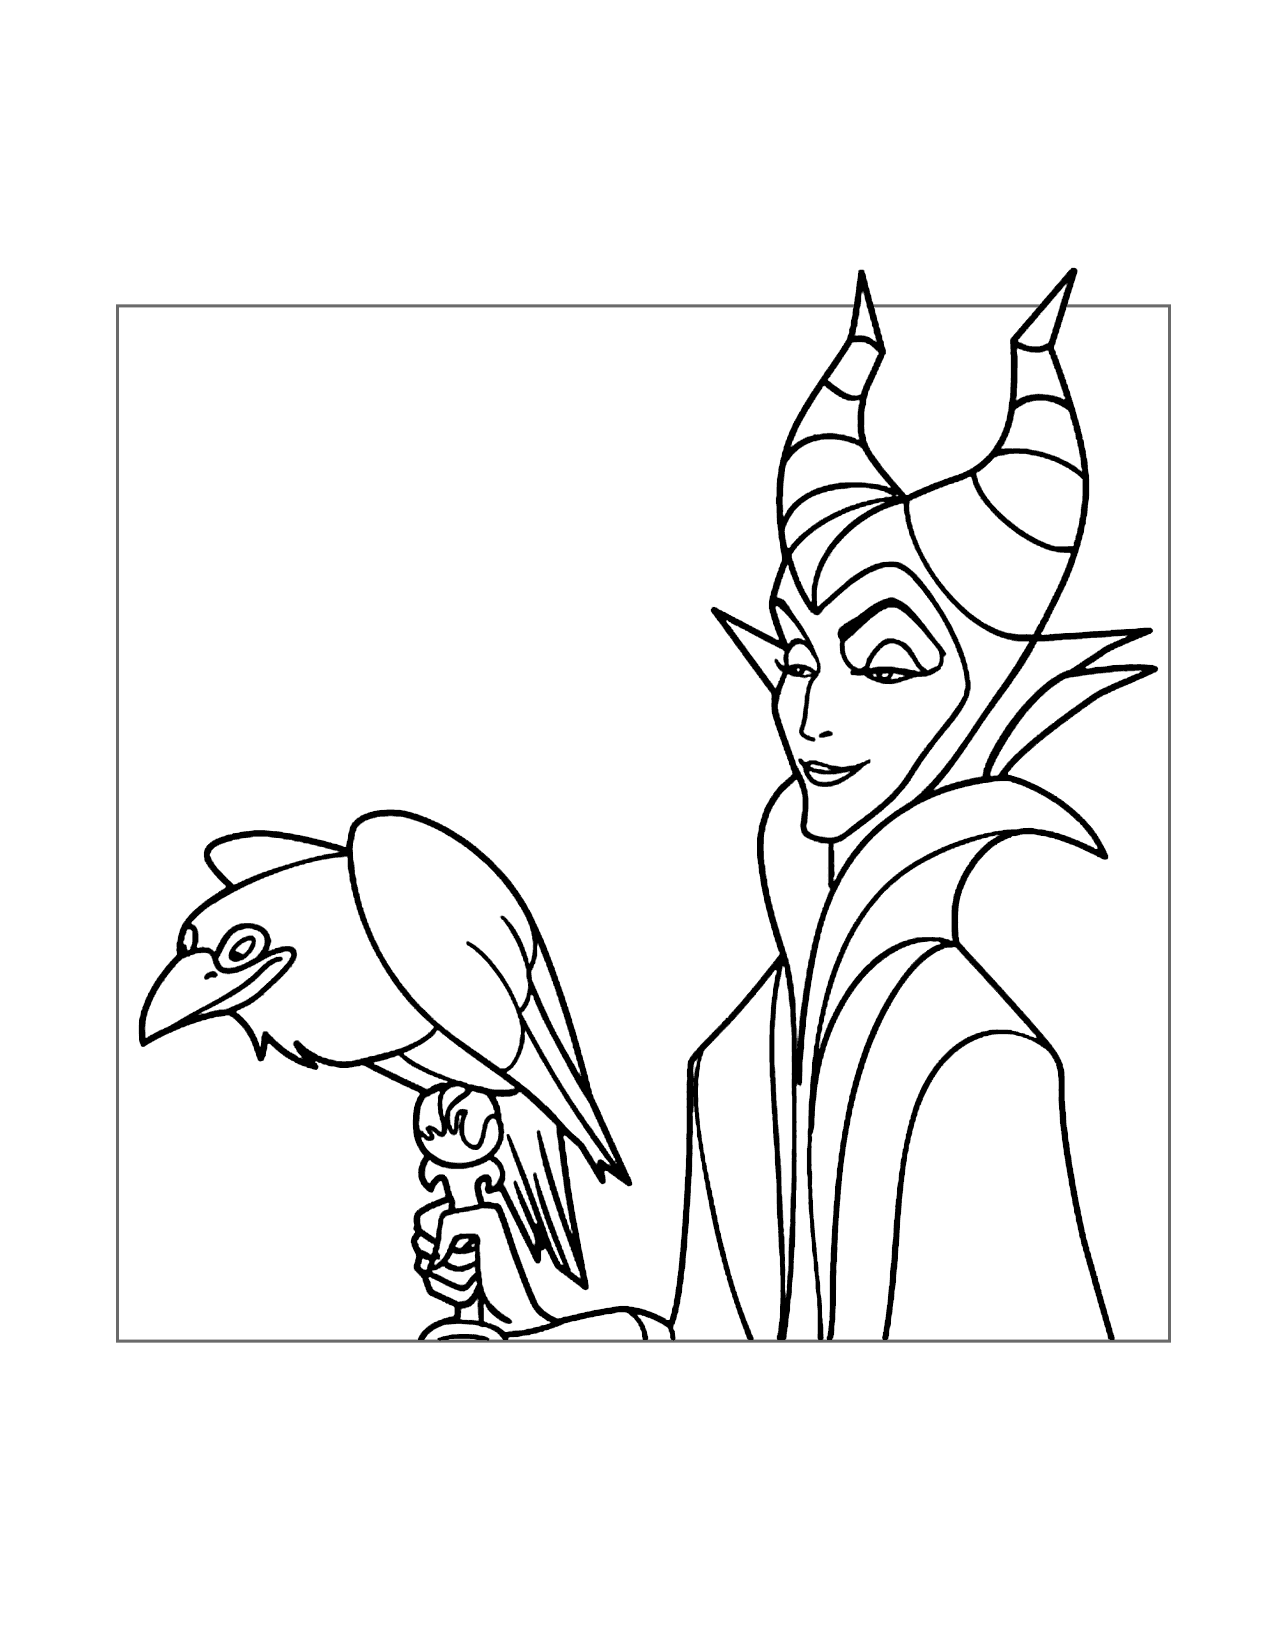 Maleficent And Diablo Coloring Page